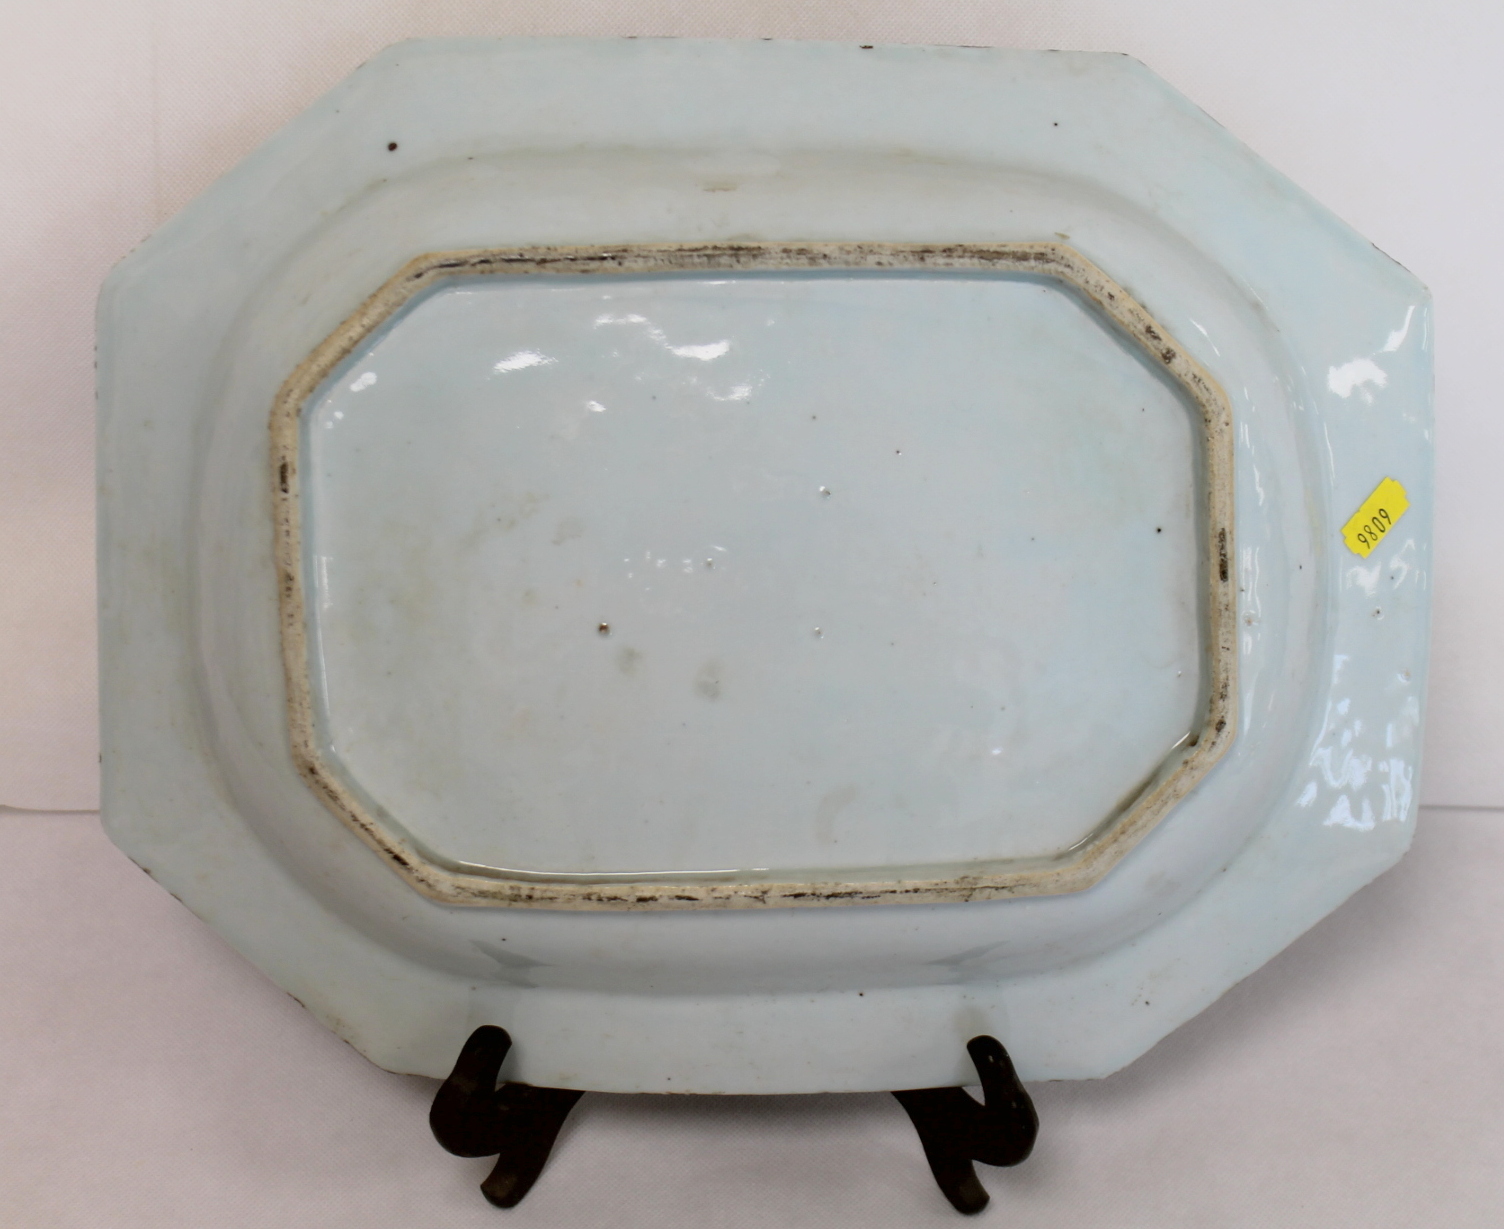 18th century Chinese Export blue & white octagonal deep ashet or meat plate decorated with figures - Image 3 of 15